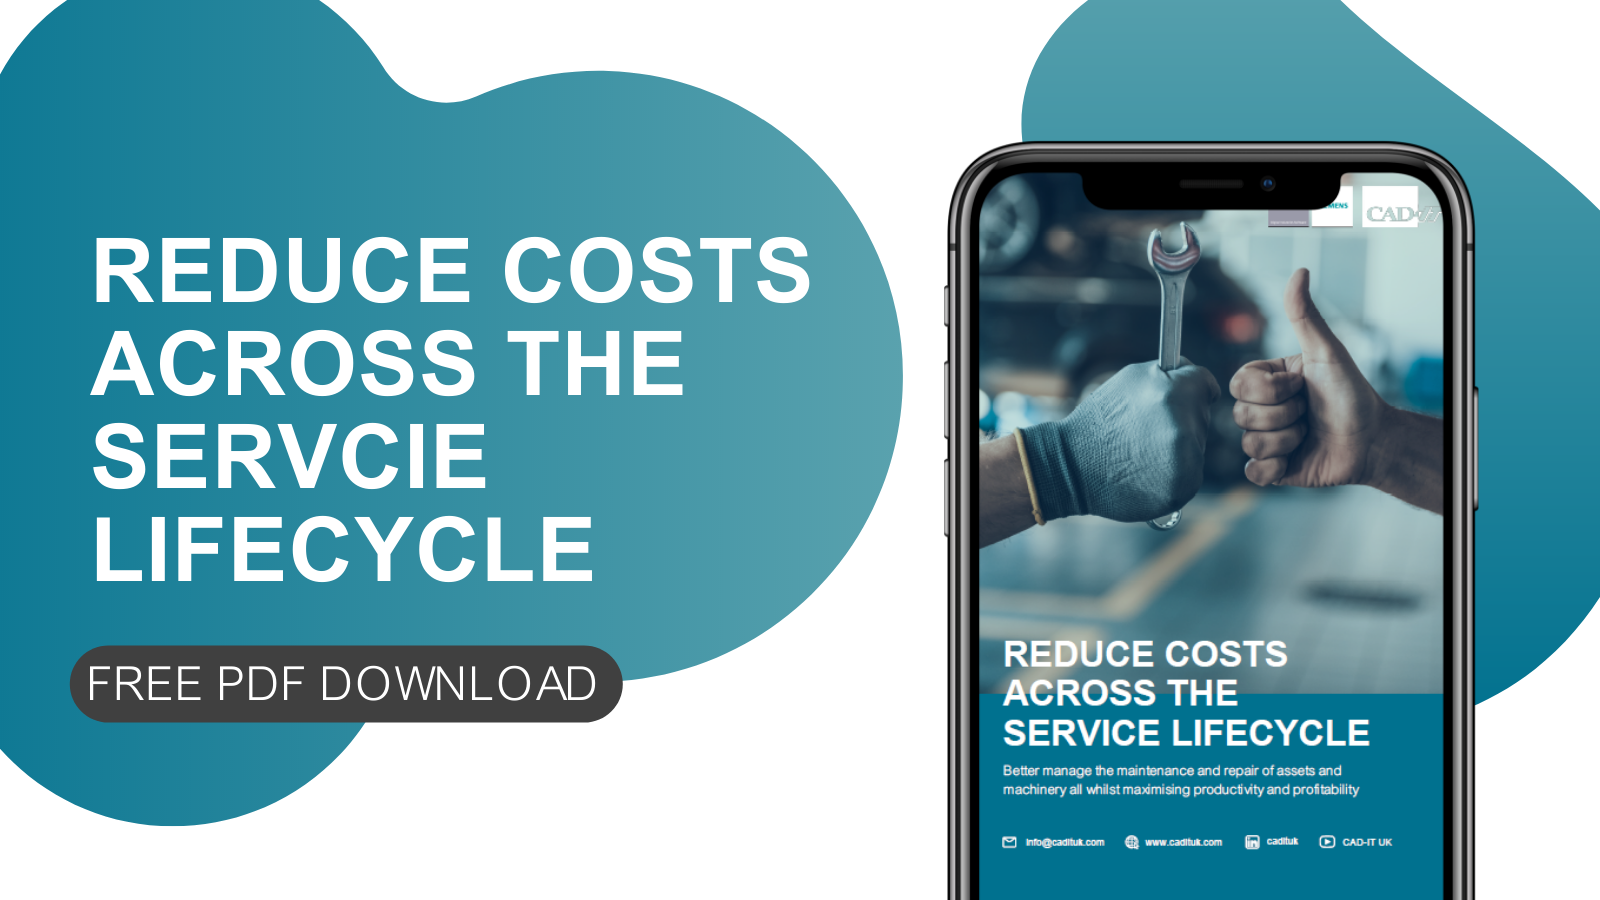 Reduce costs across the service lifecycle of your business, content download.